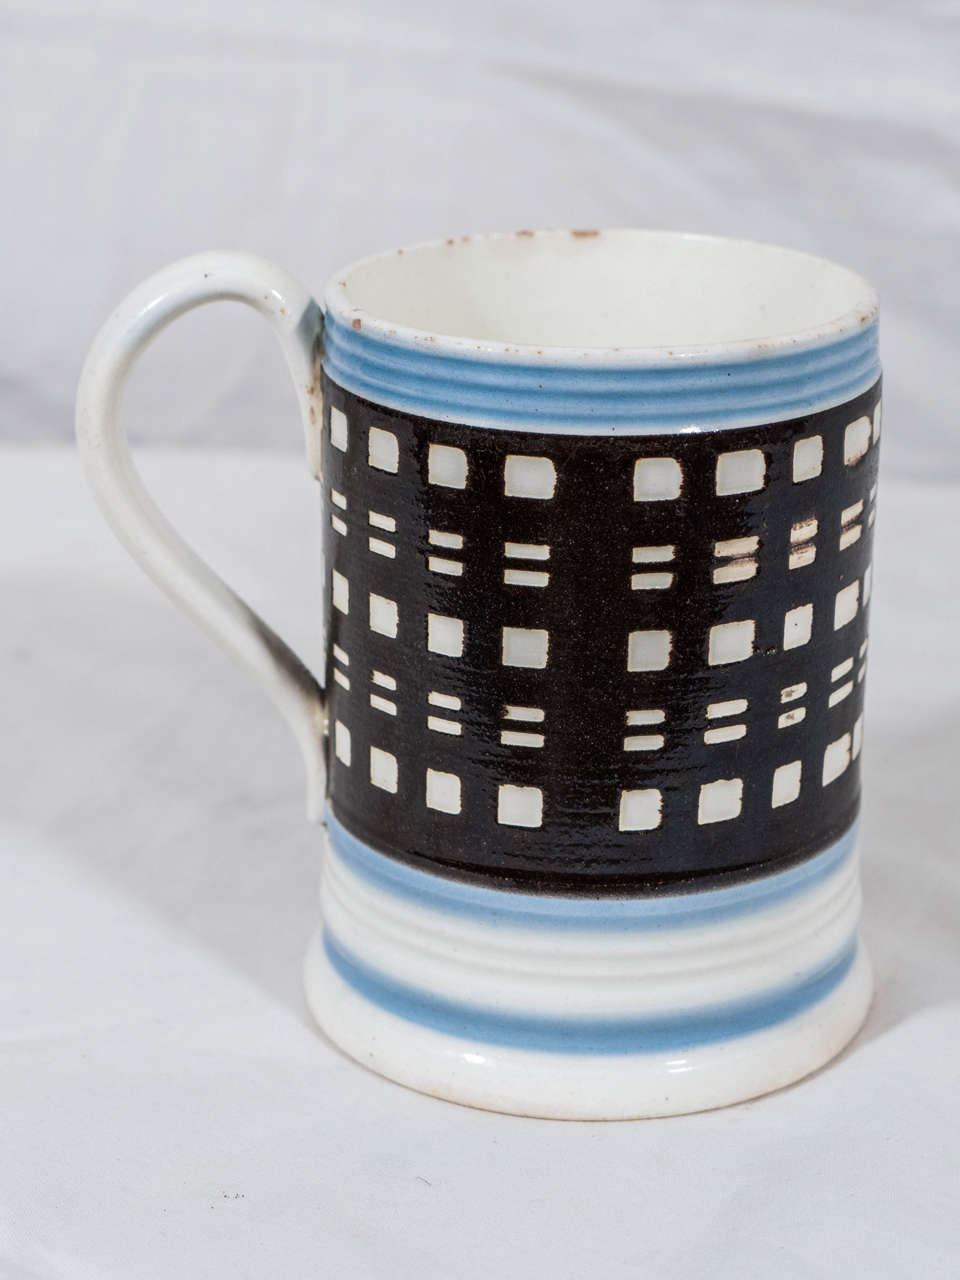 A mocha mug with a surprising, modern geometric look. It is decorated with horizontal bands of light blue above and below a large band of black slip with engine turned horizontal cuts through the black slip forming checks and rectangles.
For images